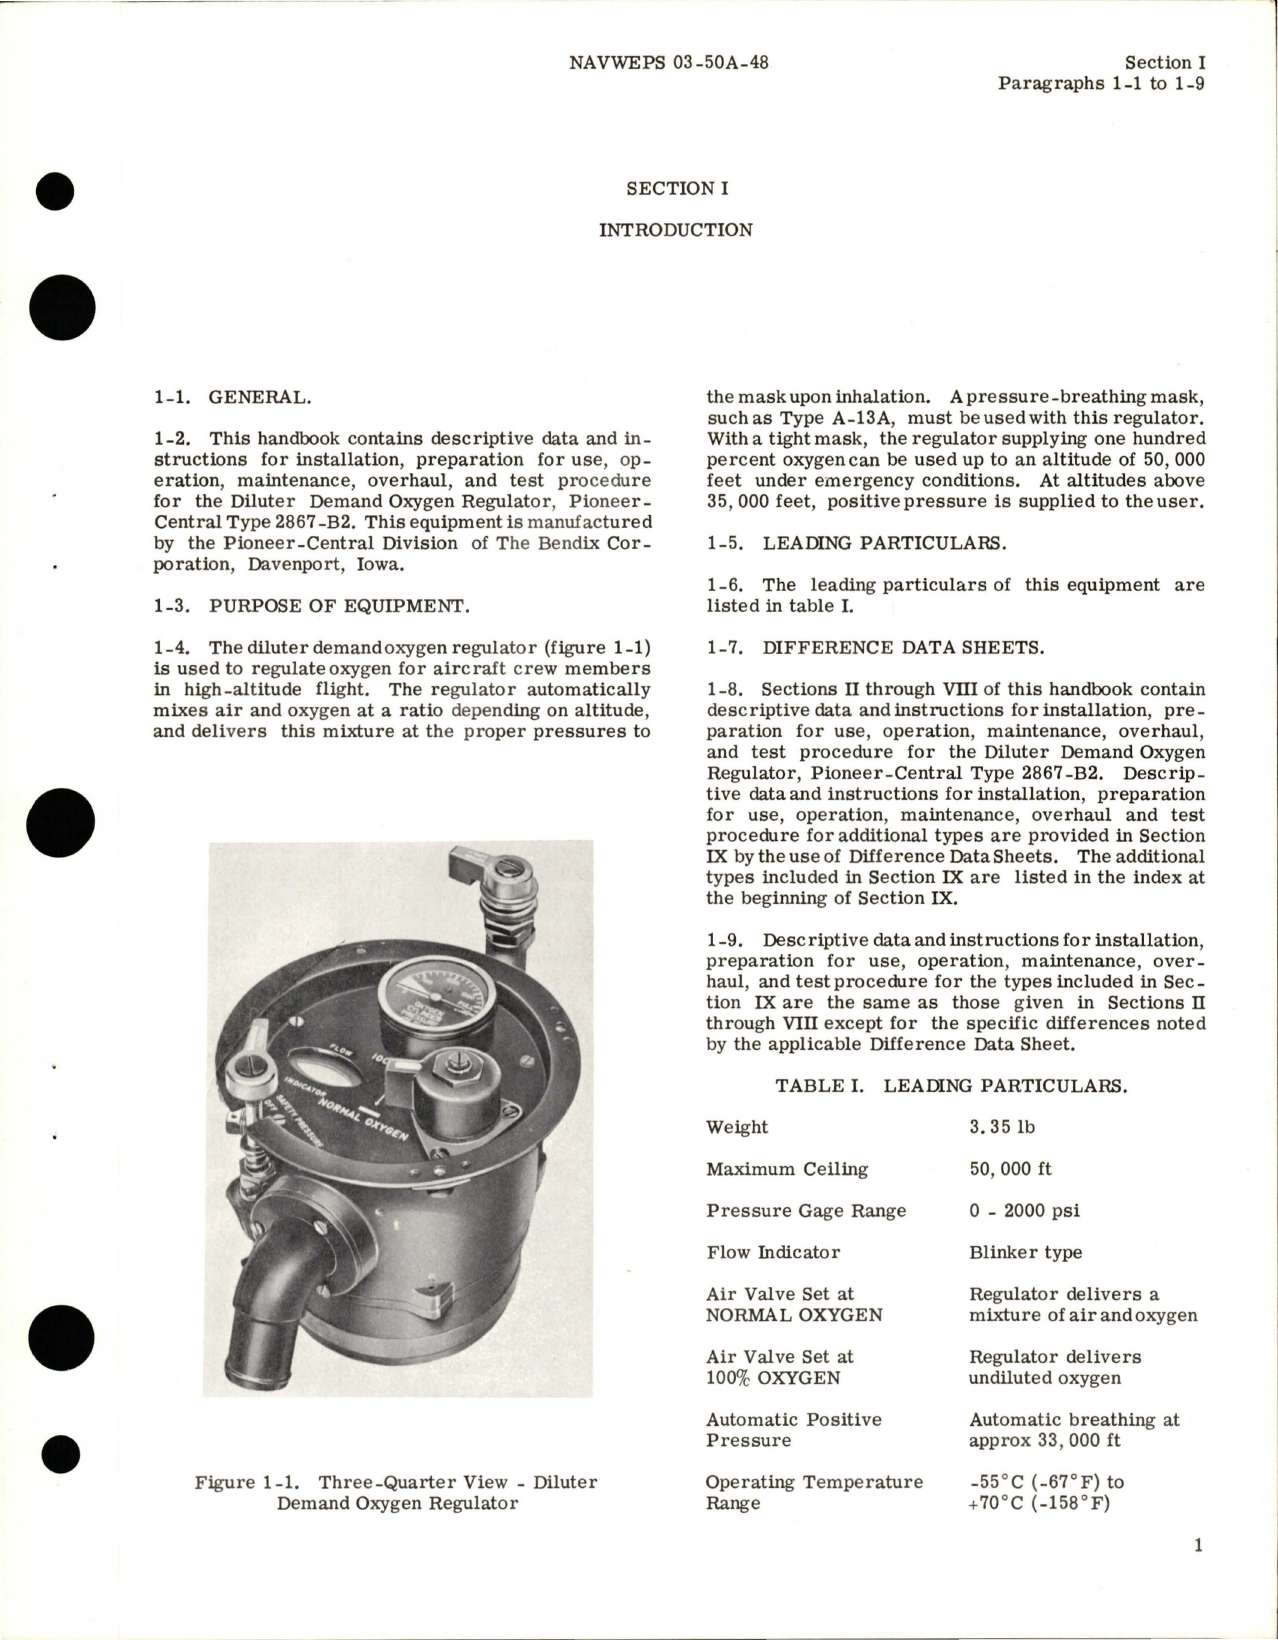 Sample page 5 from AirCorps Library document: Operation, Maintenance, and Overhaul Instructions for Diluter Demand Oxygen Regulator - Part 2867-B2, 2867-7B-C1, 2872-B2, 2873-B32, and 2874-B2